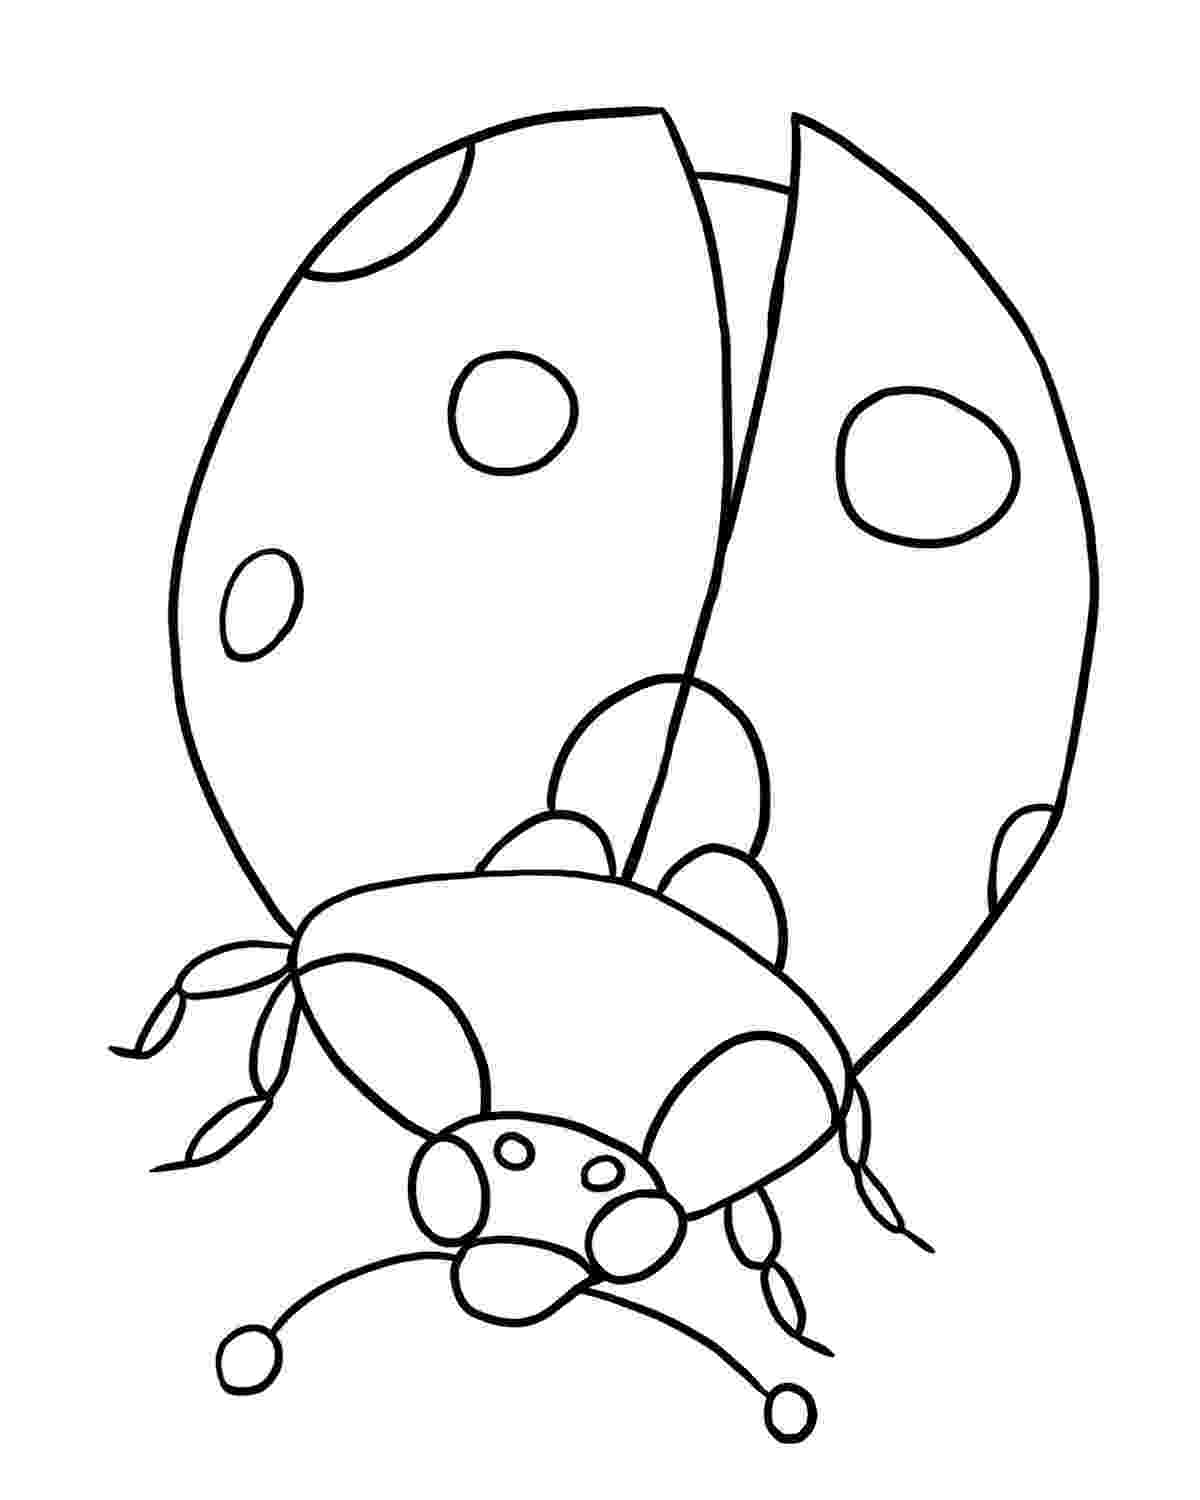 lady bug coloring pages ladybug coloring pages getcoloringpagescom lady coloring pages bug 